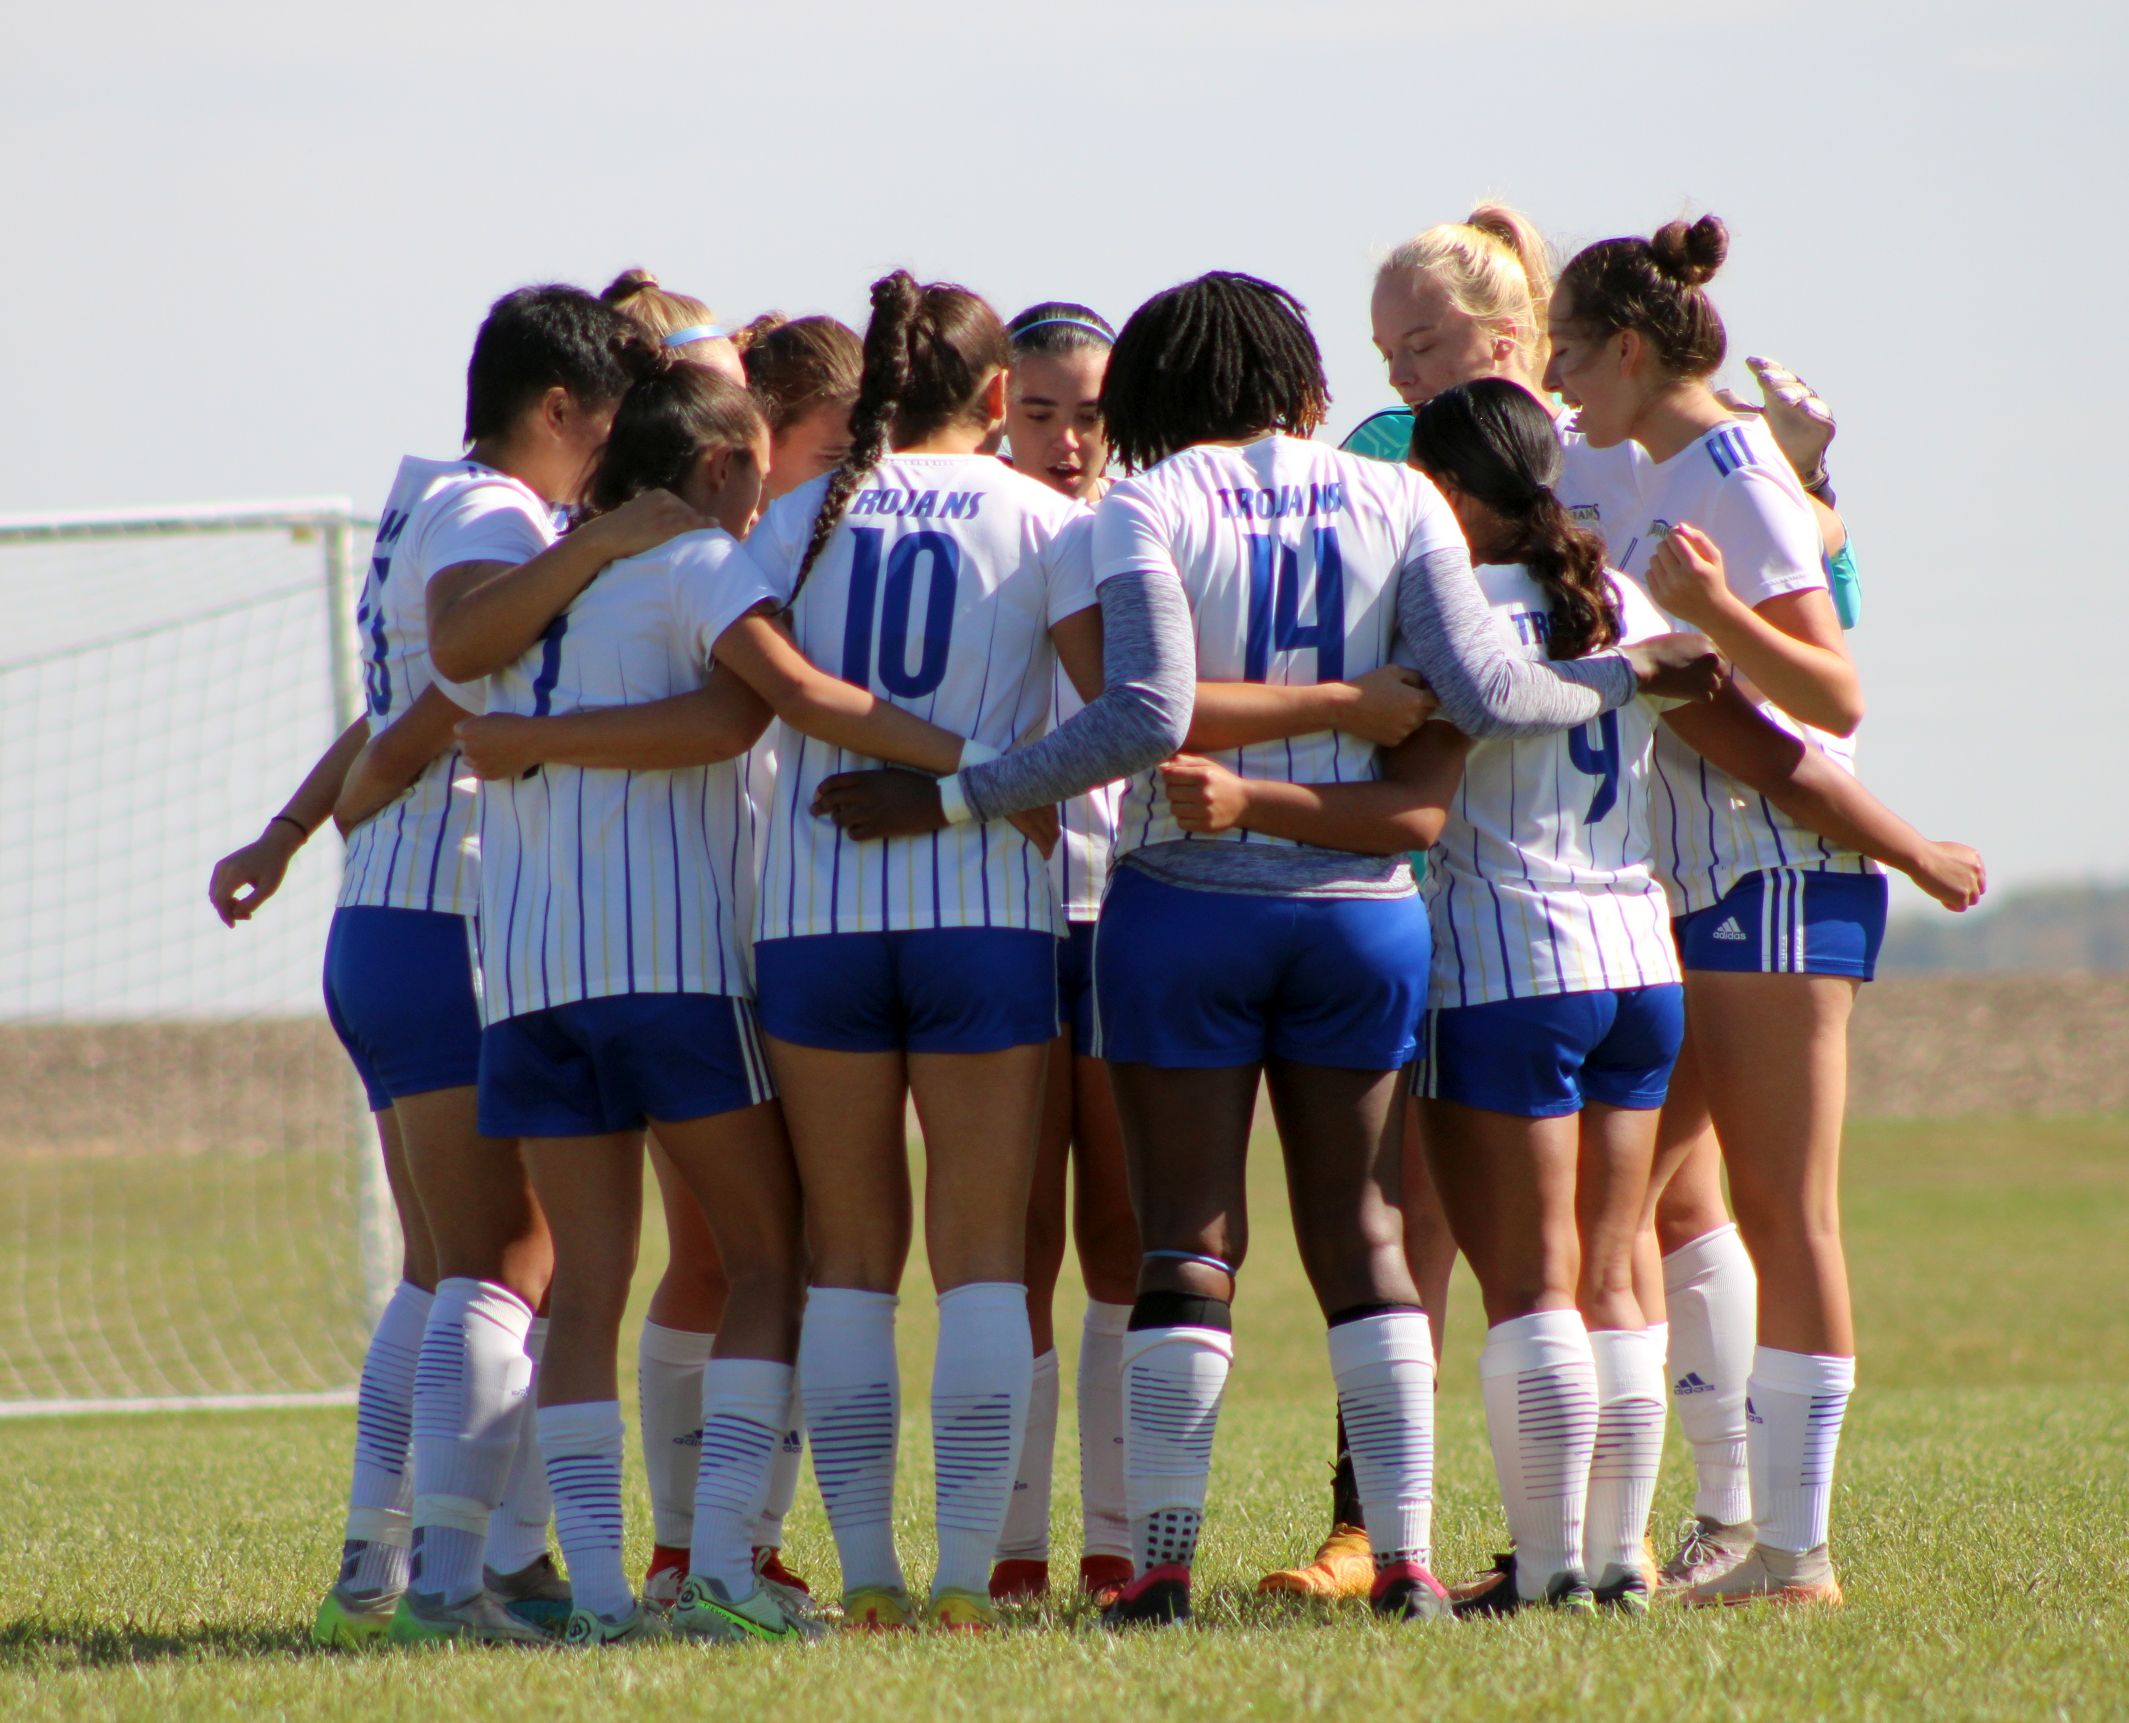 The NIACC women's soccer team huddles up before its match against Marshalltown CC on Wednesday on the NIACC campus.